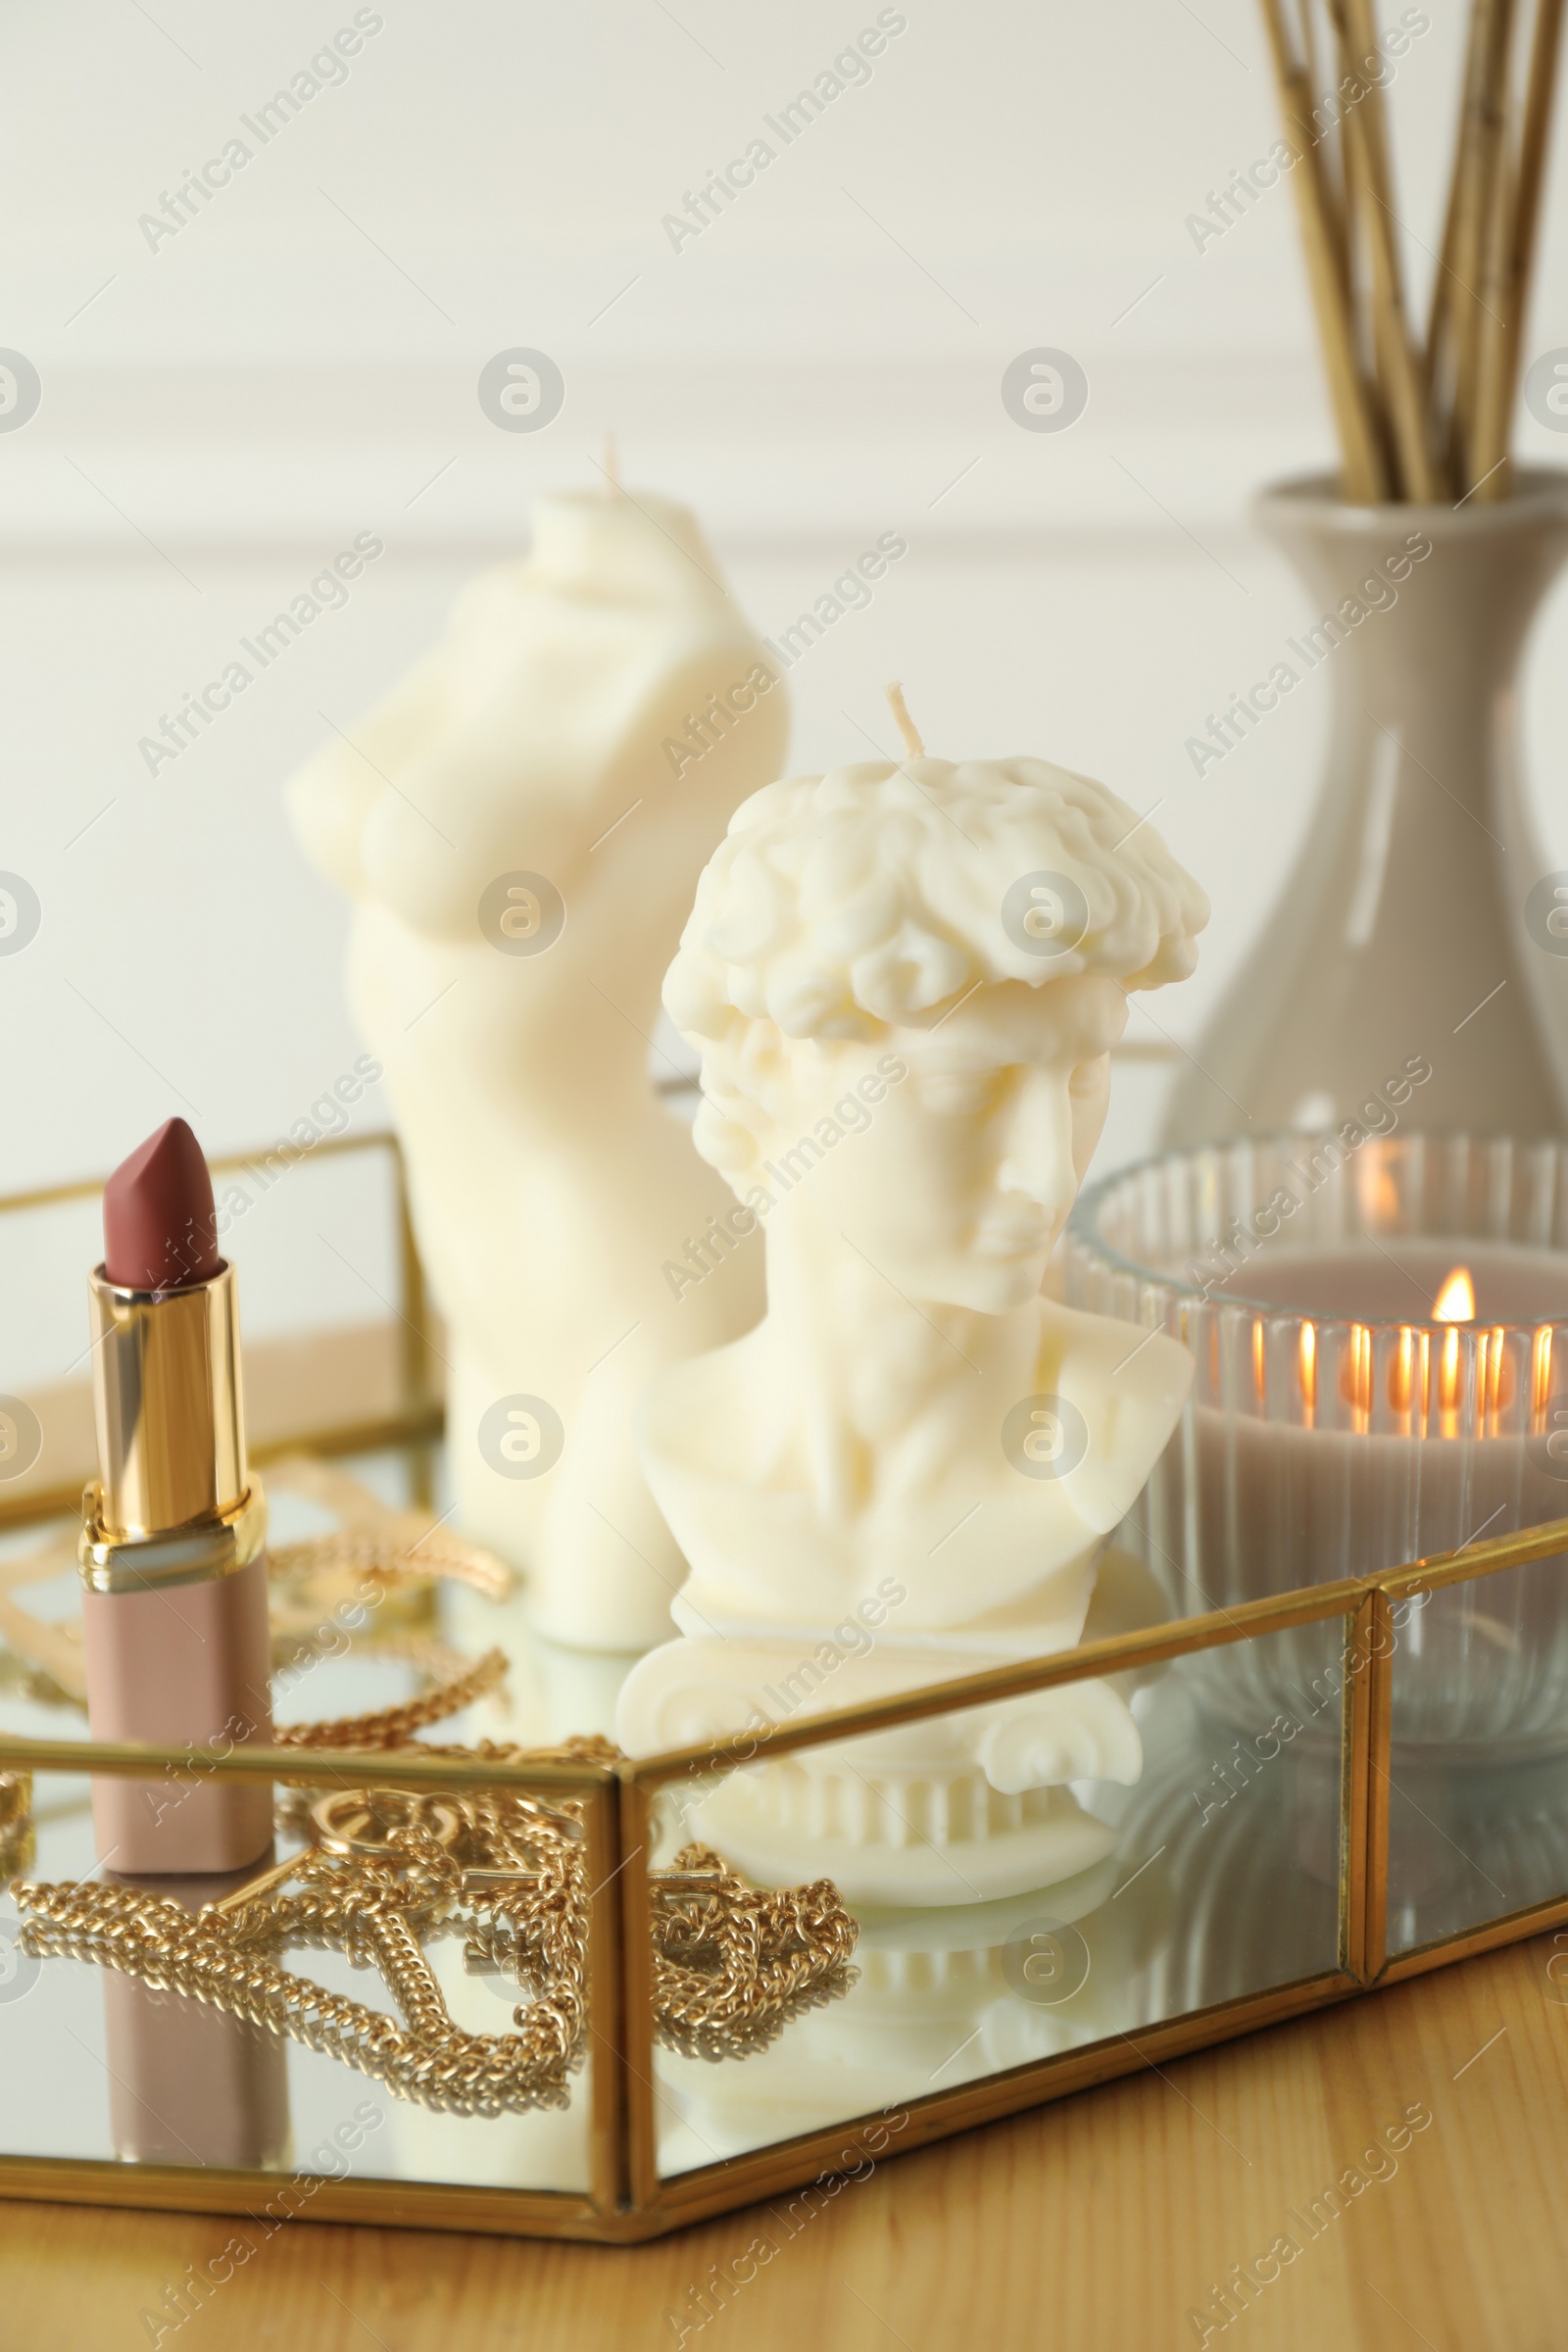 Photo of David bust and female body shaped candles on wooden table. Stylish decor